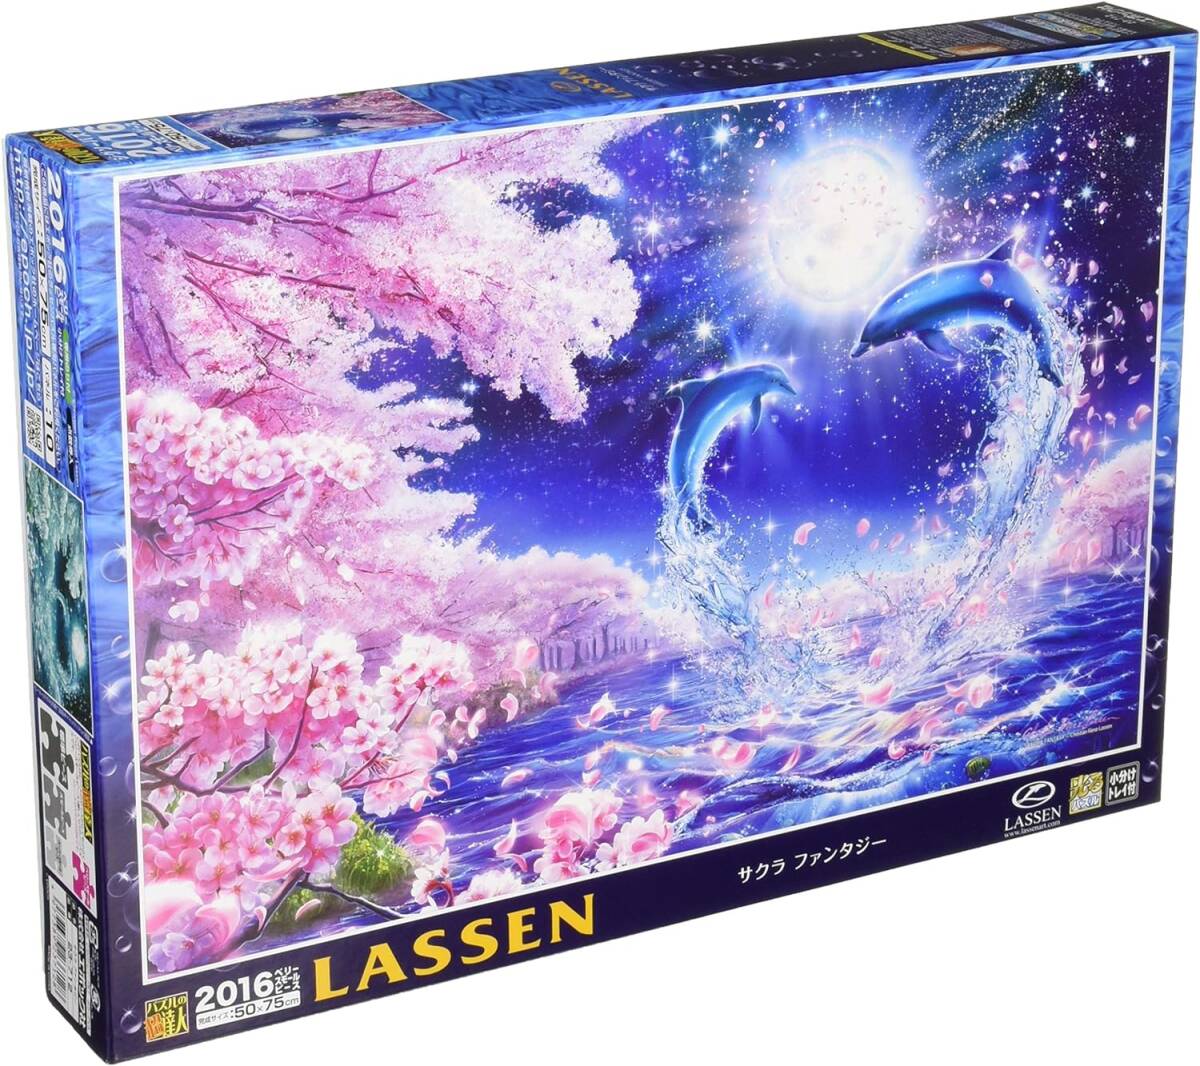 2016 Piece Jigsaw Puzzle Lassen Sakura Fantasy Very Small Piece [Glowing Puzzle] (50x75cm), toy, game, puzzle, jigsaw puzzle